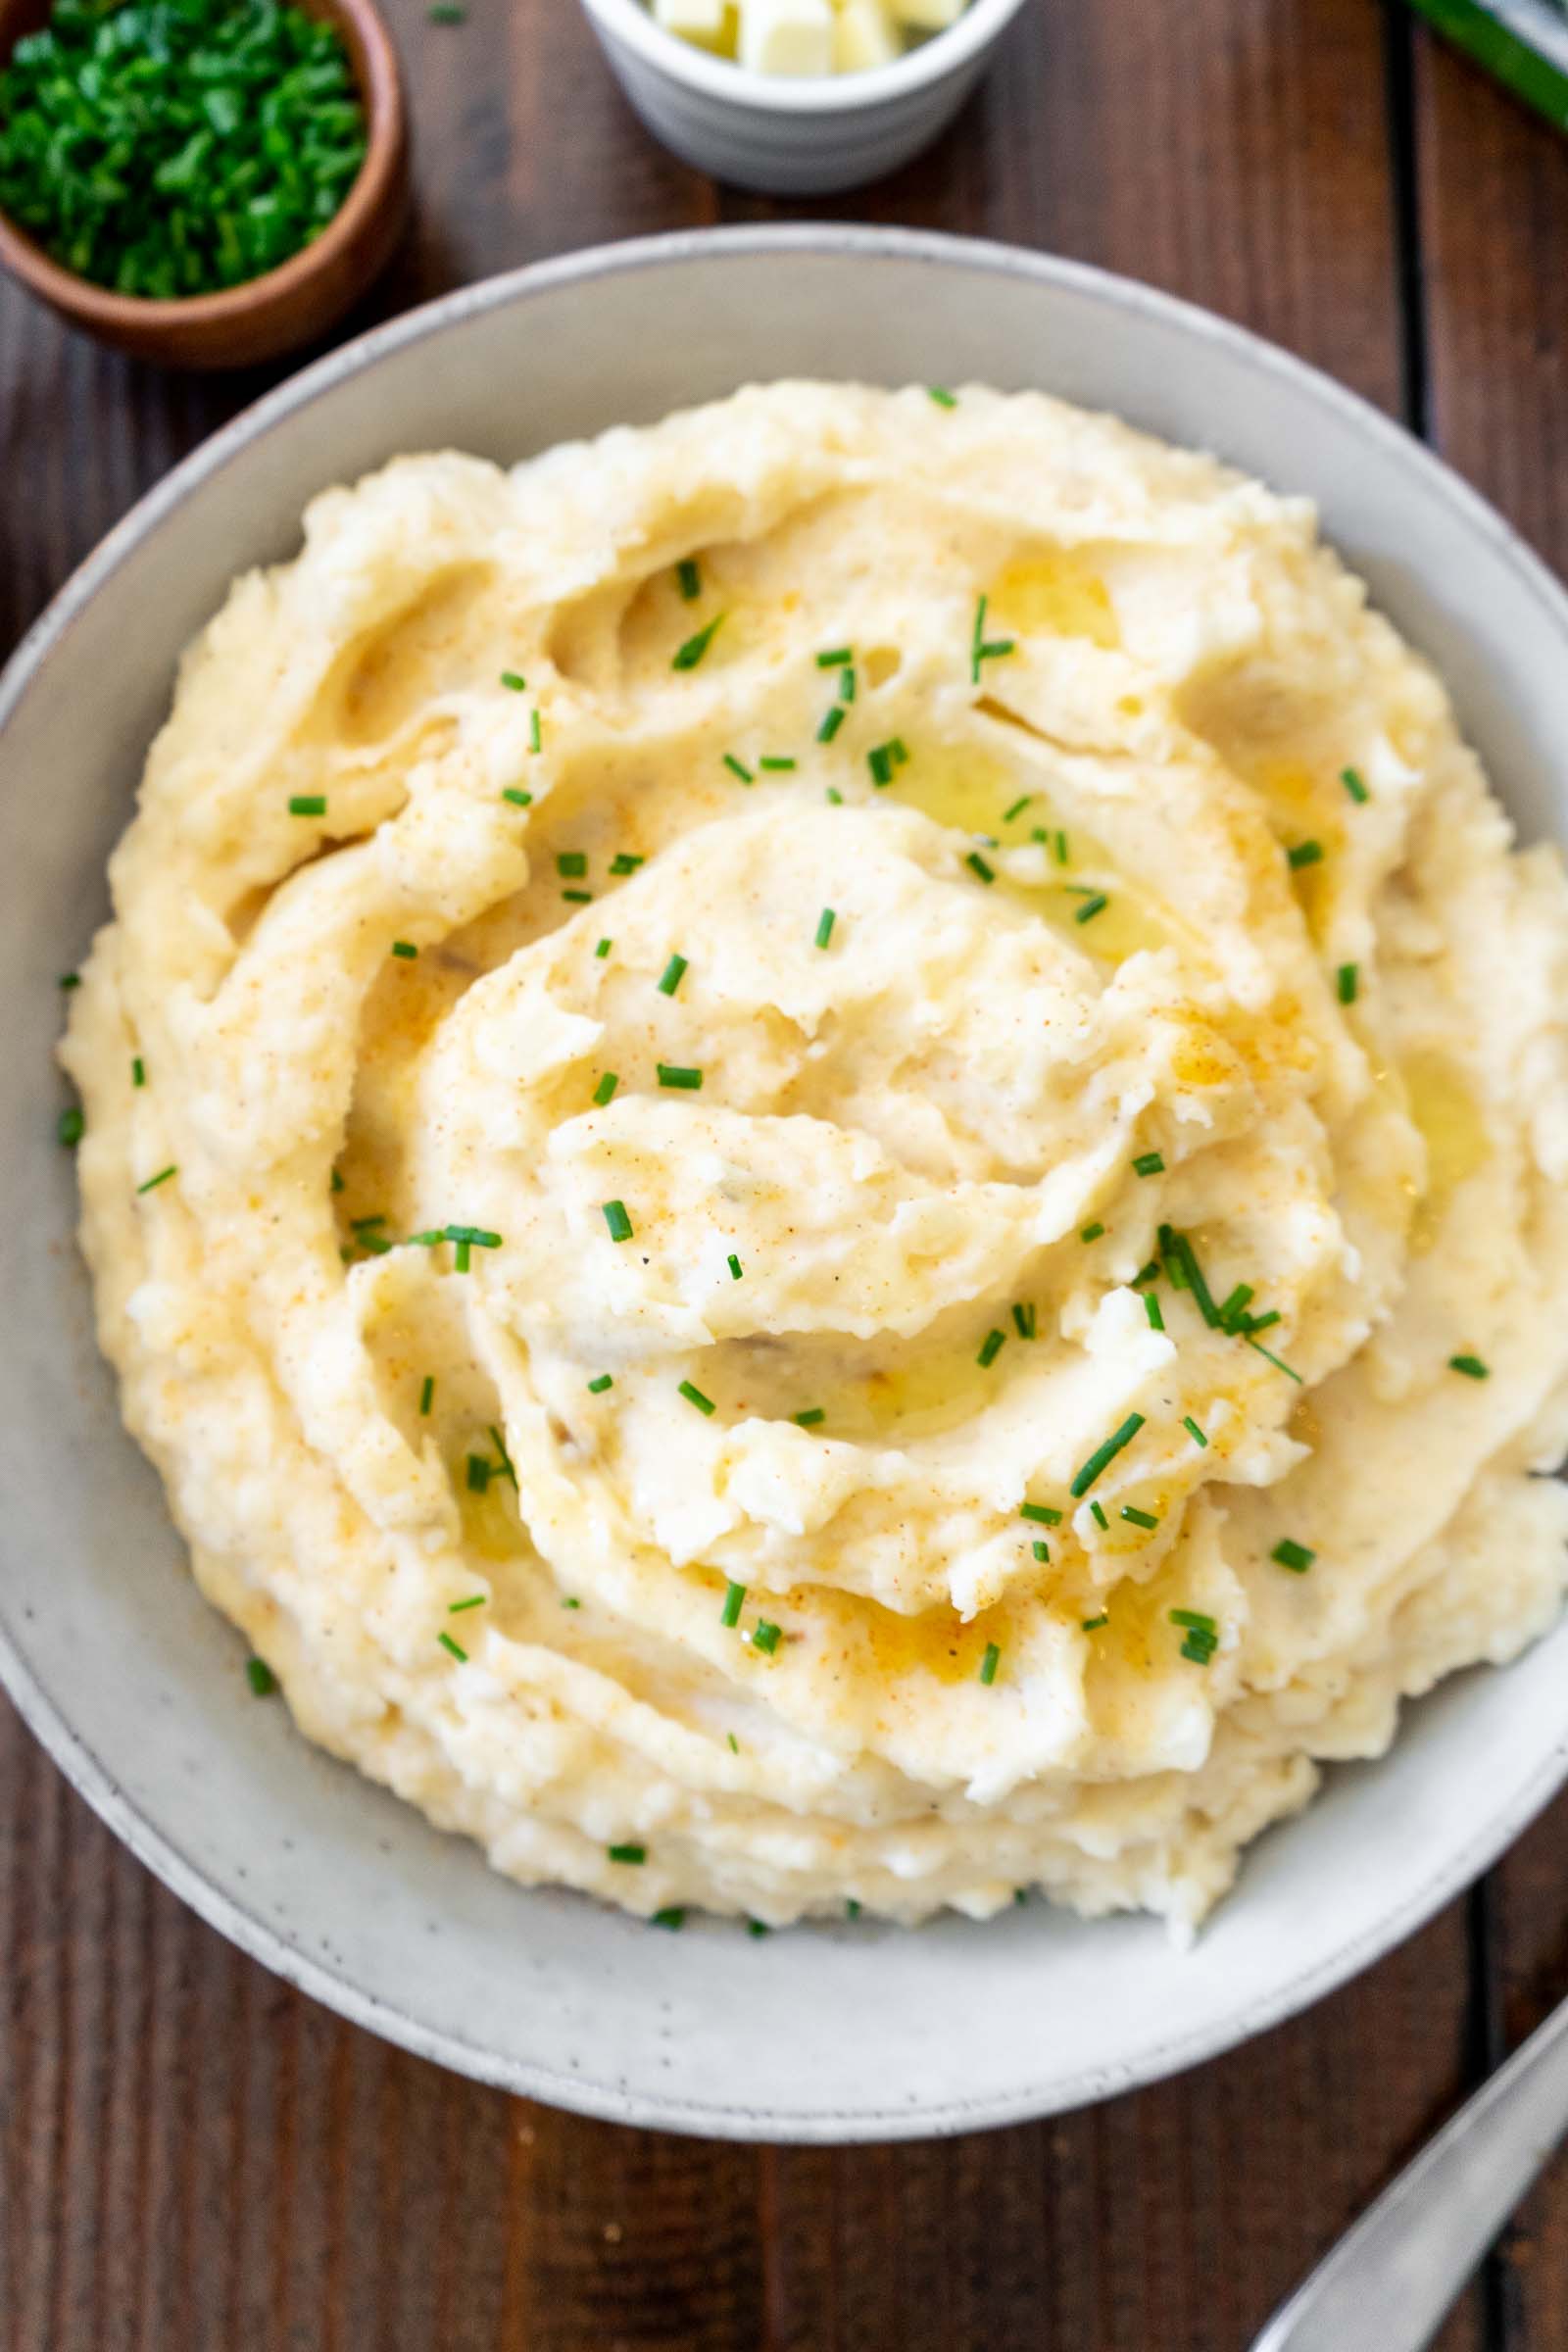 A bowl of mashed potatoes topped with chives.